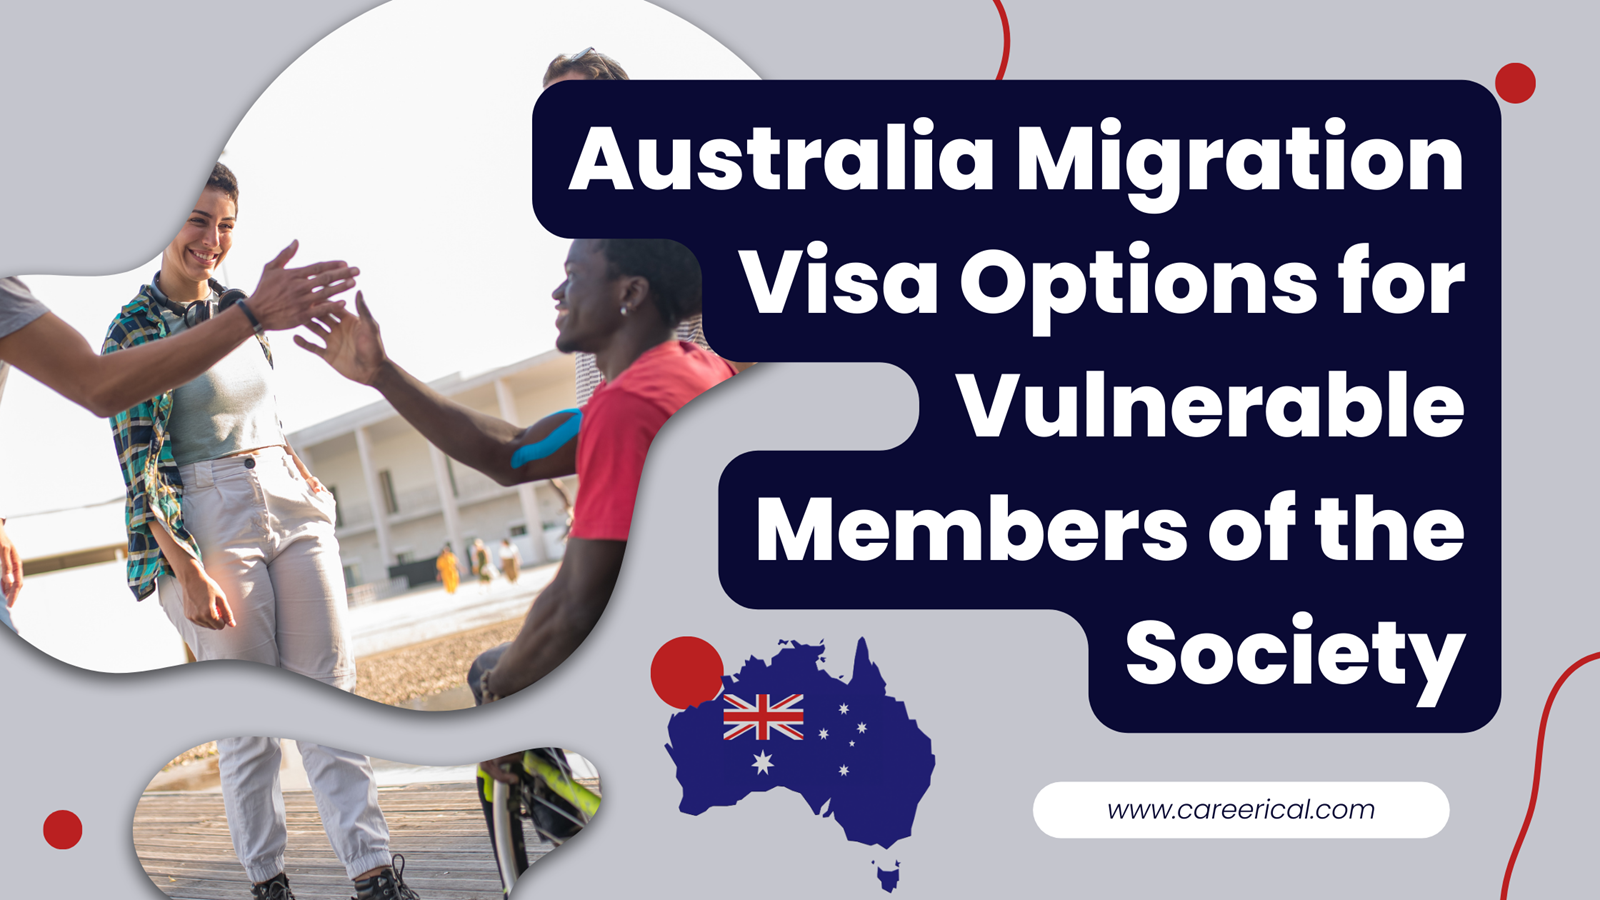 Australia Migration Visa Options for Vulnerable Members of the Society